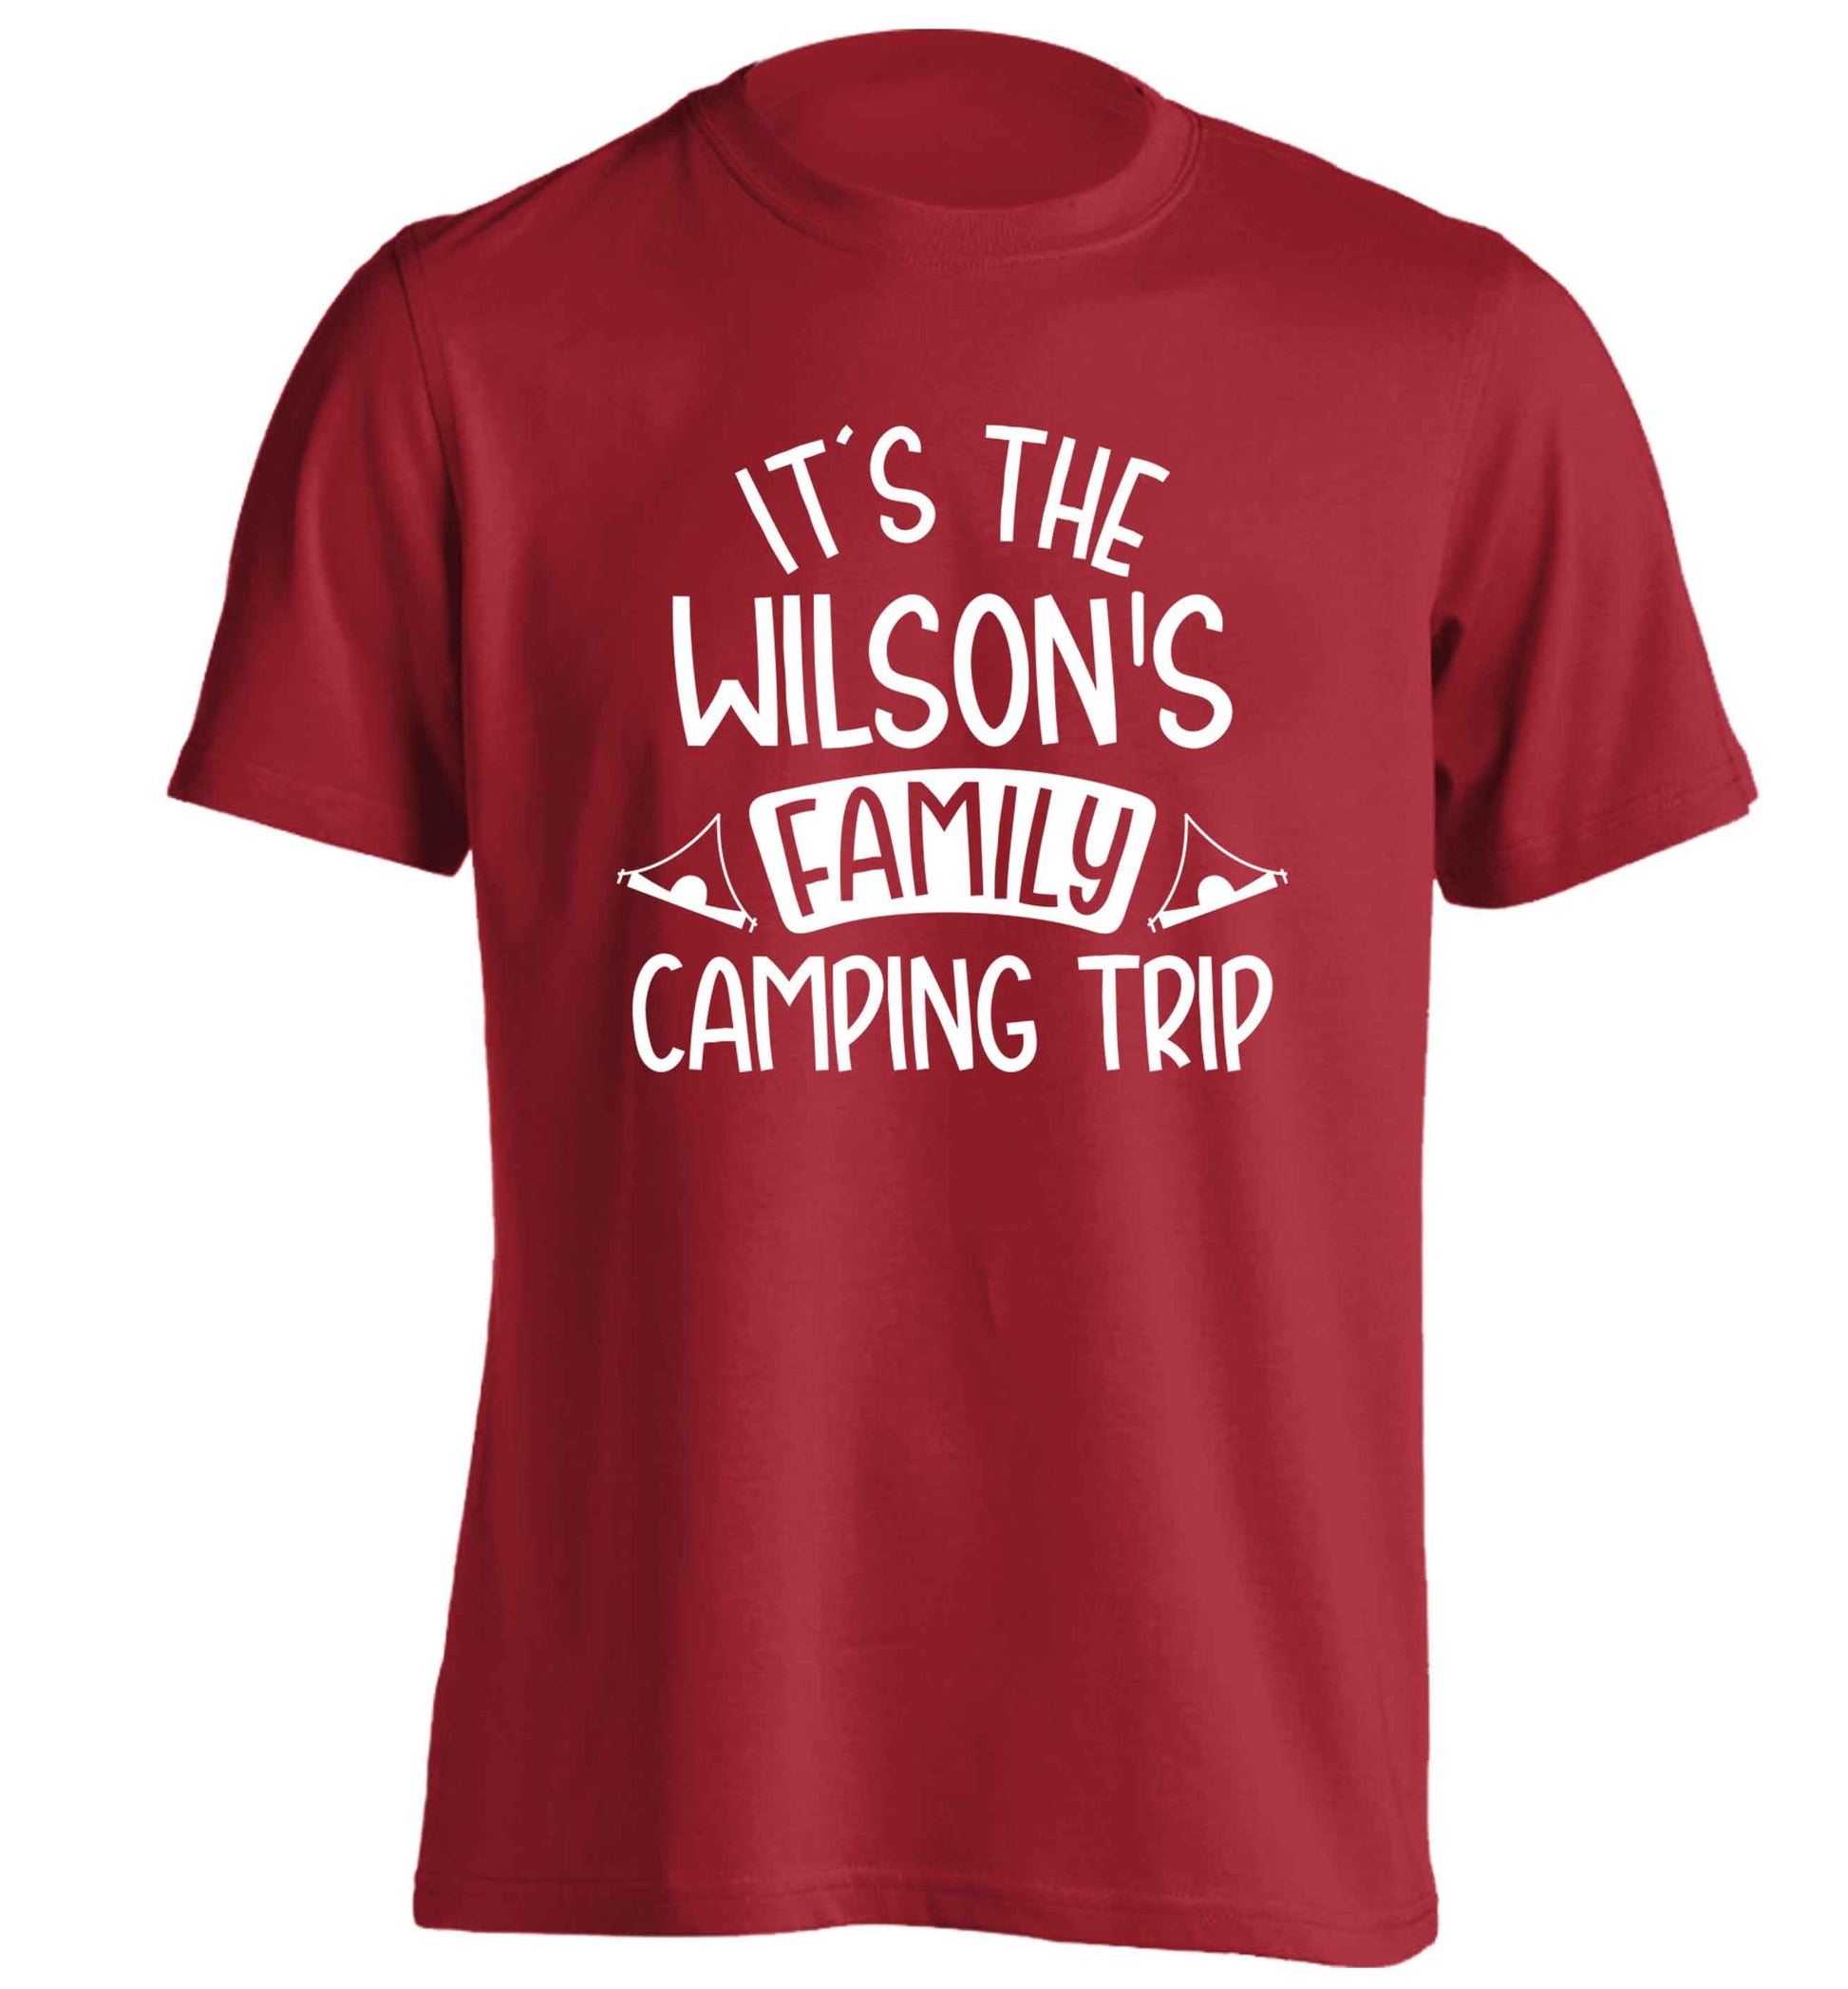 It's the Wilson's family camping trip personalised adults unisex red Tshirt 2XL